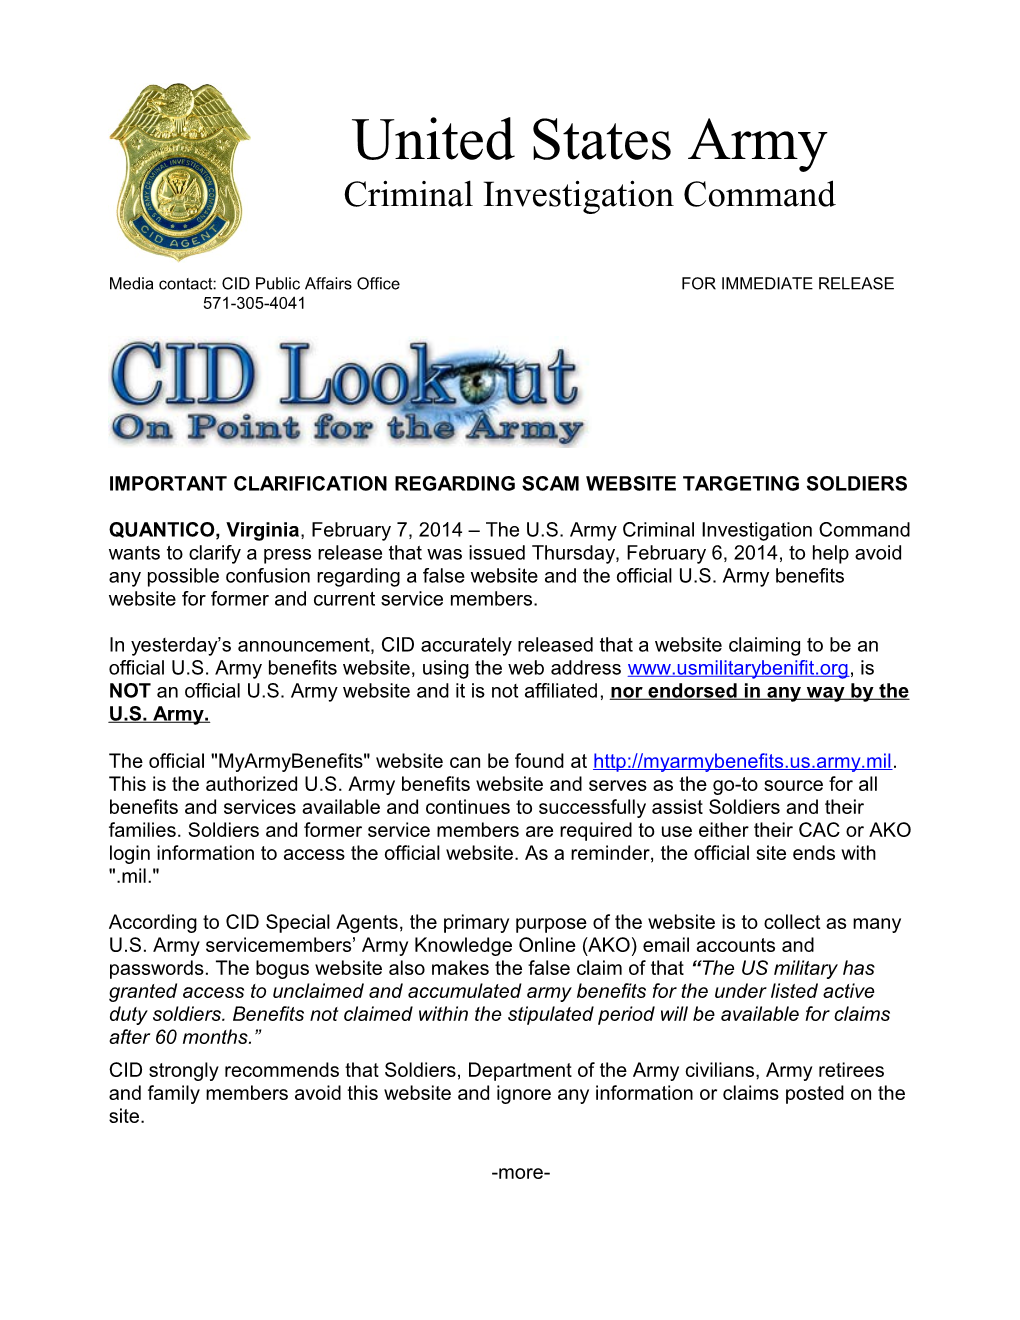 Media Contact: CID Public Affairs Office for IMMEDIATE RELEASE